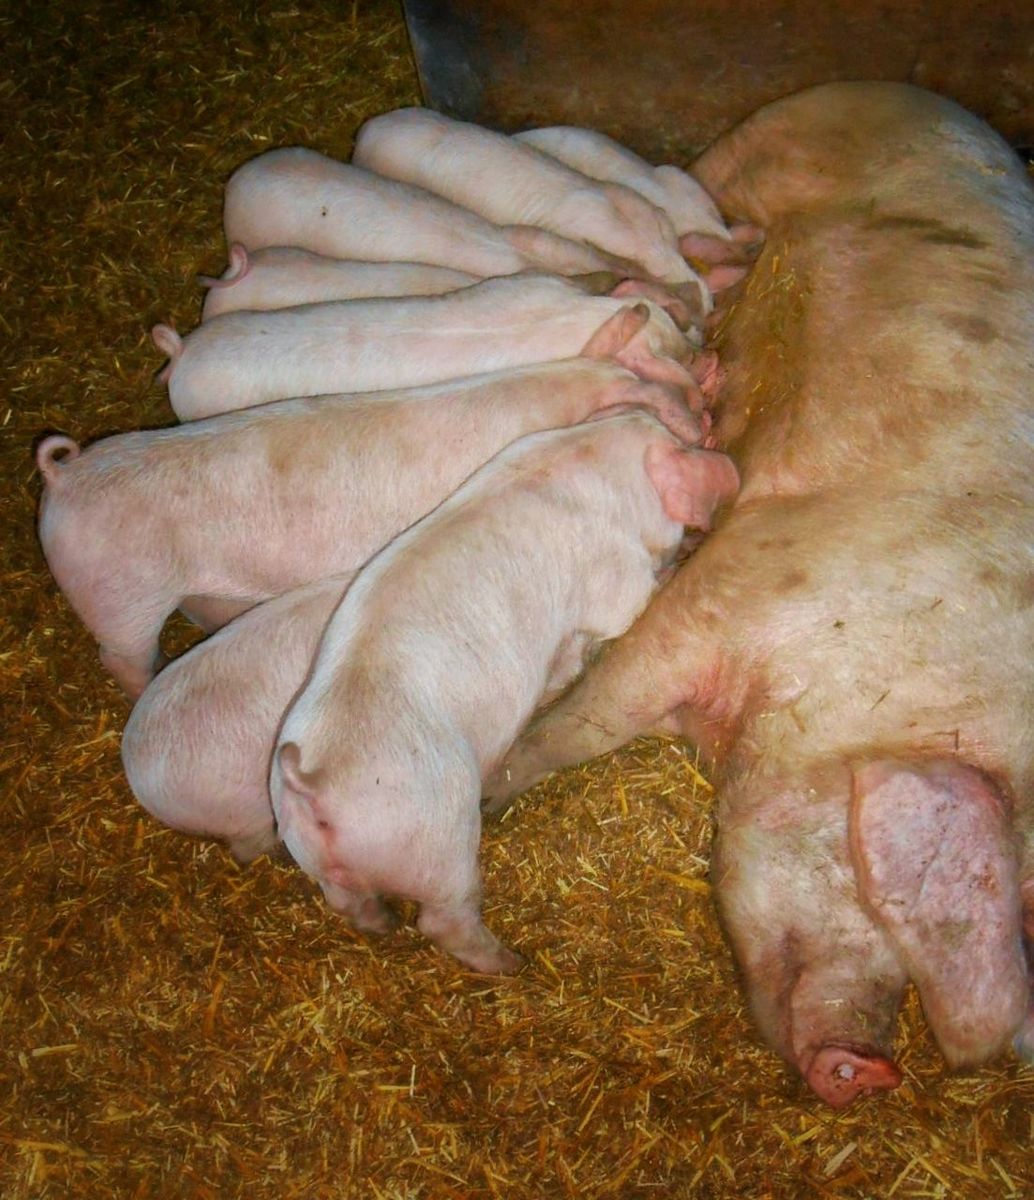 View of a pig with piglets